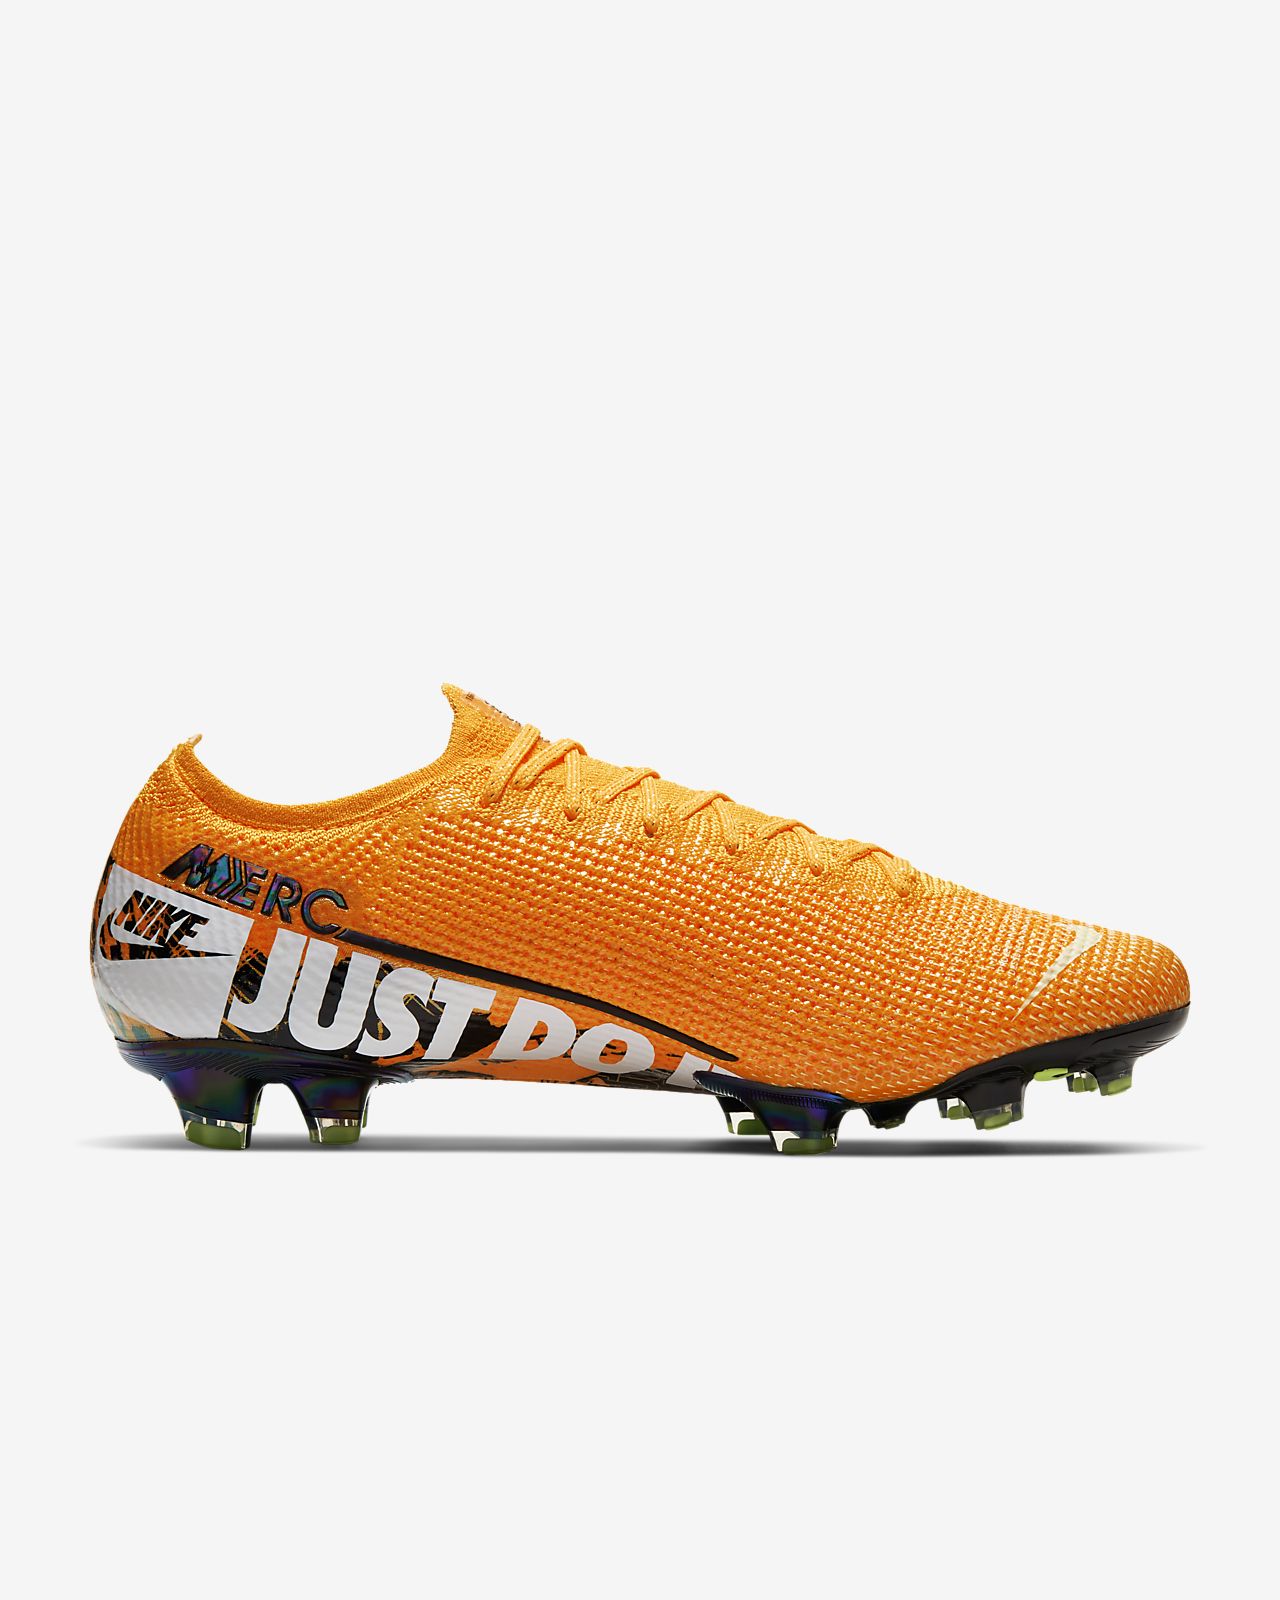 Gray Nike Mercurial Soccer Cleats Best Price Guarantee at